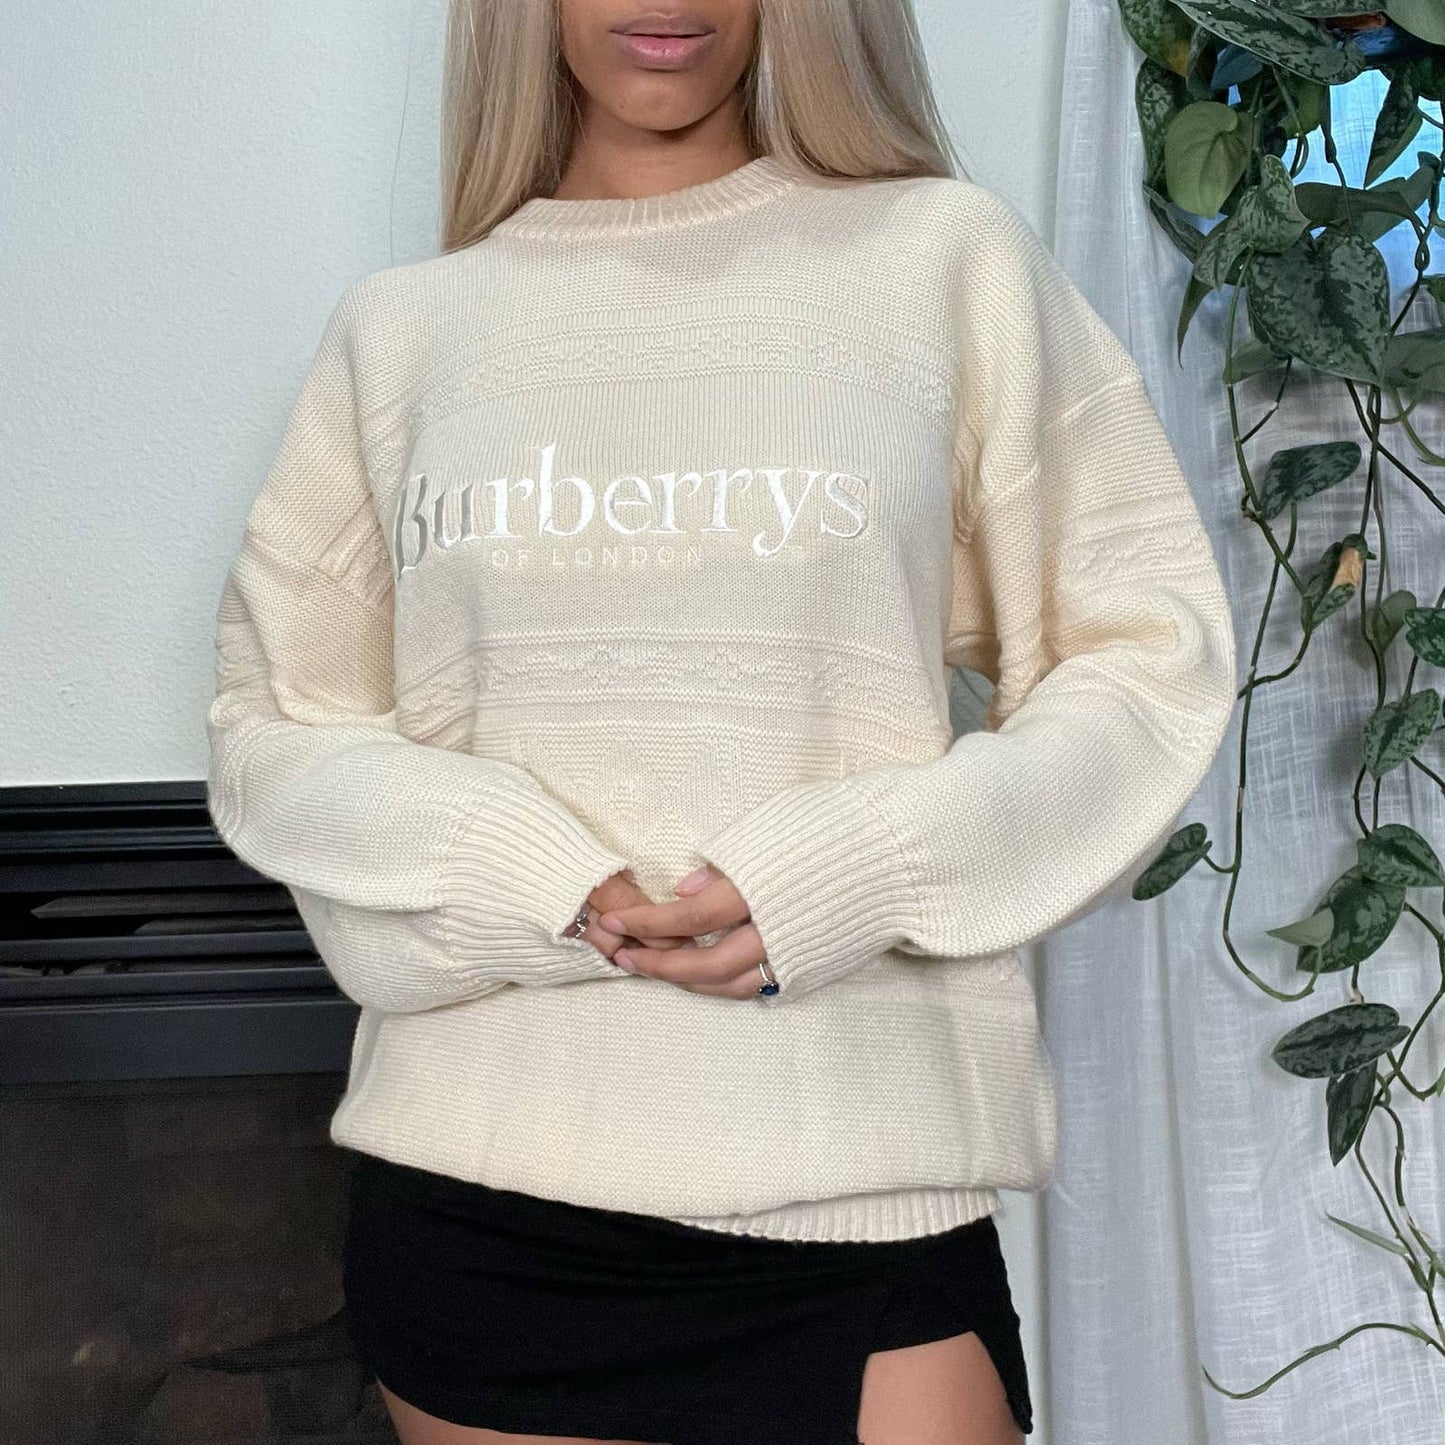 Vintage Burberry spell out sweater in color cream (XS-XL)